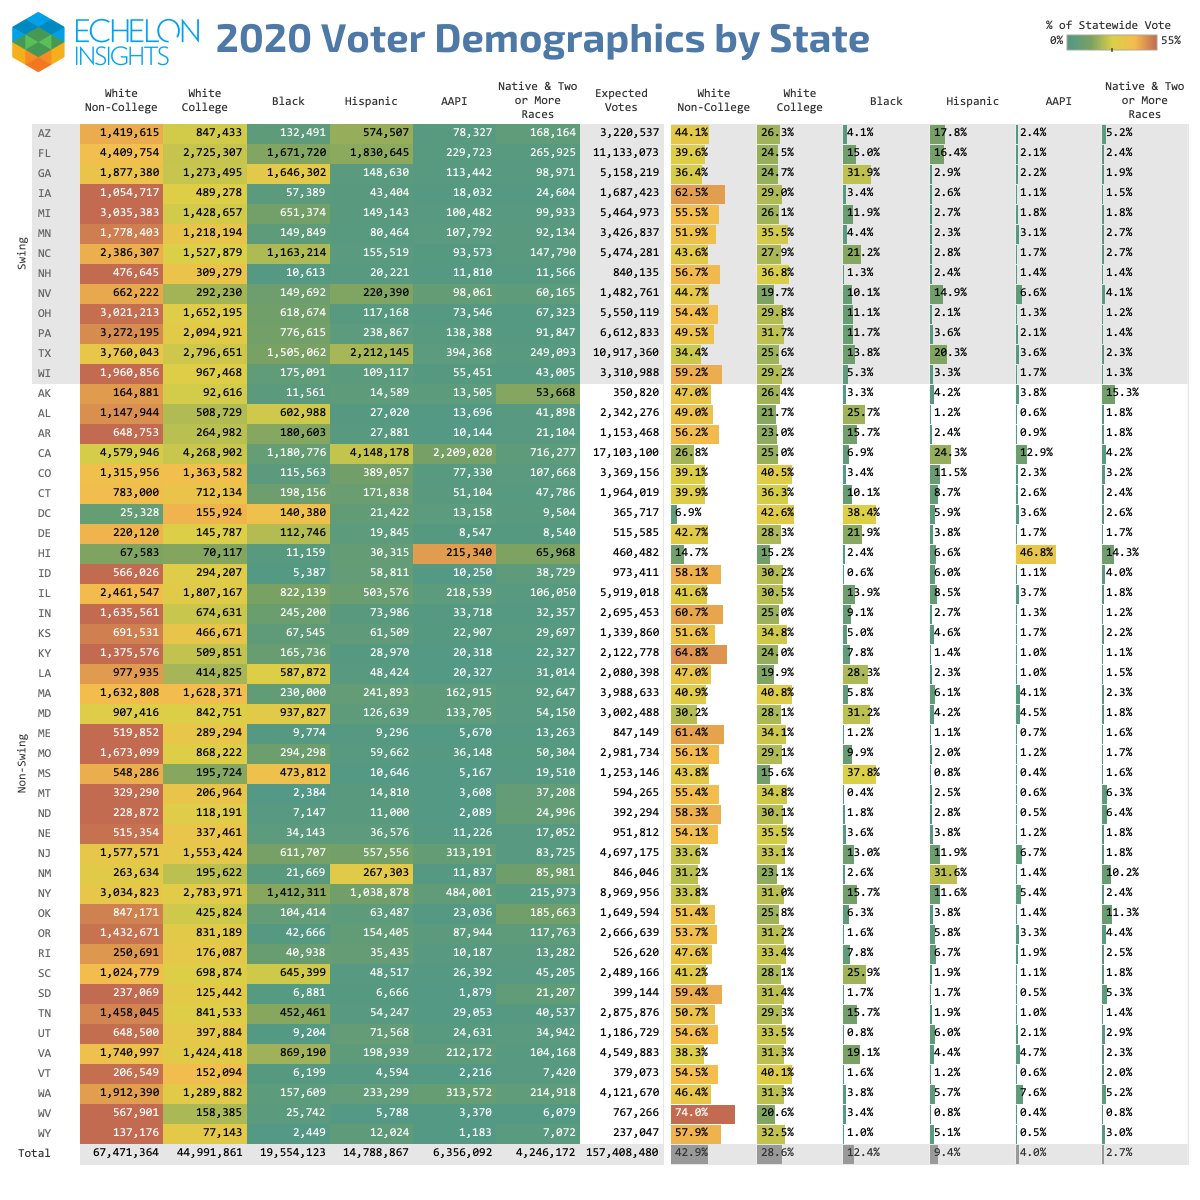 Our full state by state breakdown, tracking voter blocs as small as 1,183 Asian voters in Wyoming. It's big, so you may want to view this at the link.  https://medium.com/echelon-indicators/america-is-headed-for-record-turnout-heres-what-that-looks-like-3432deb9fe05